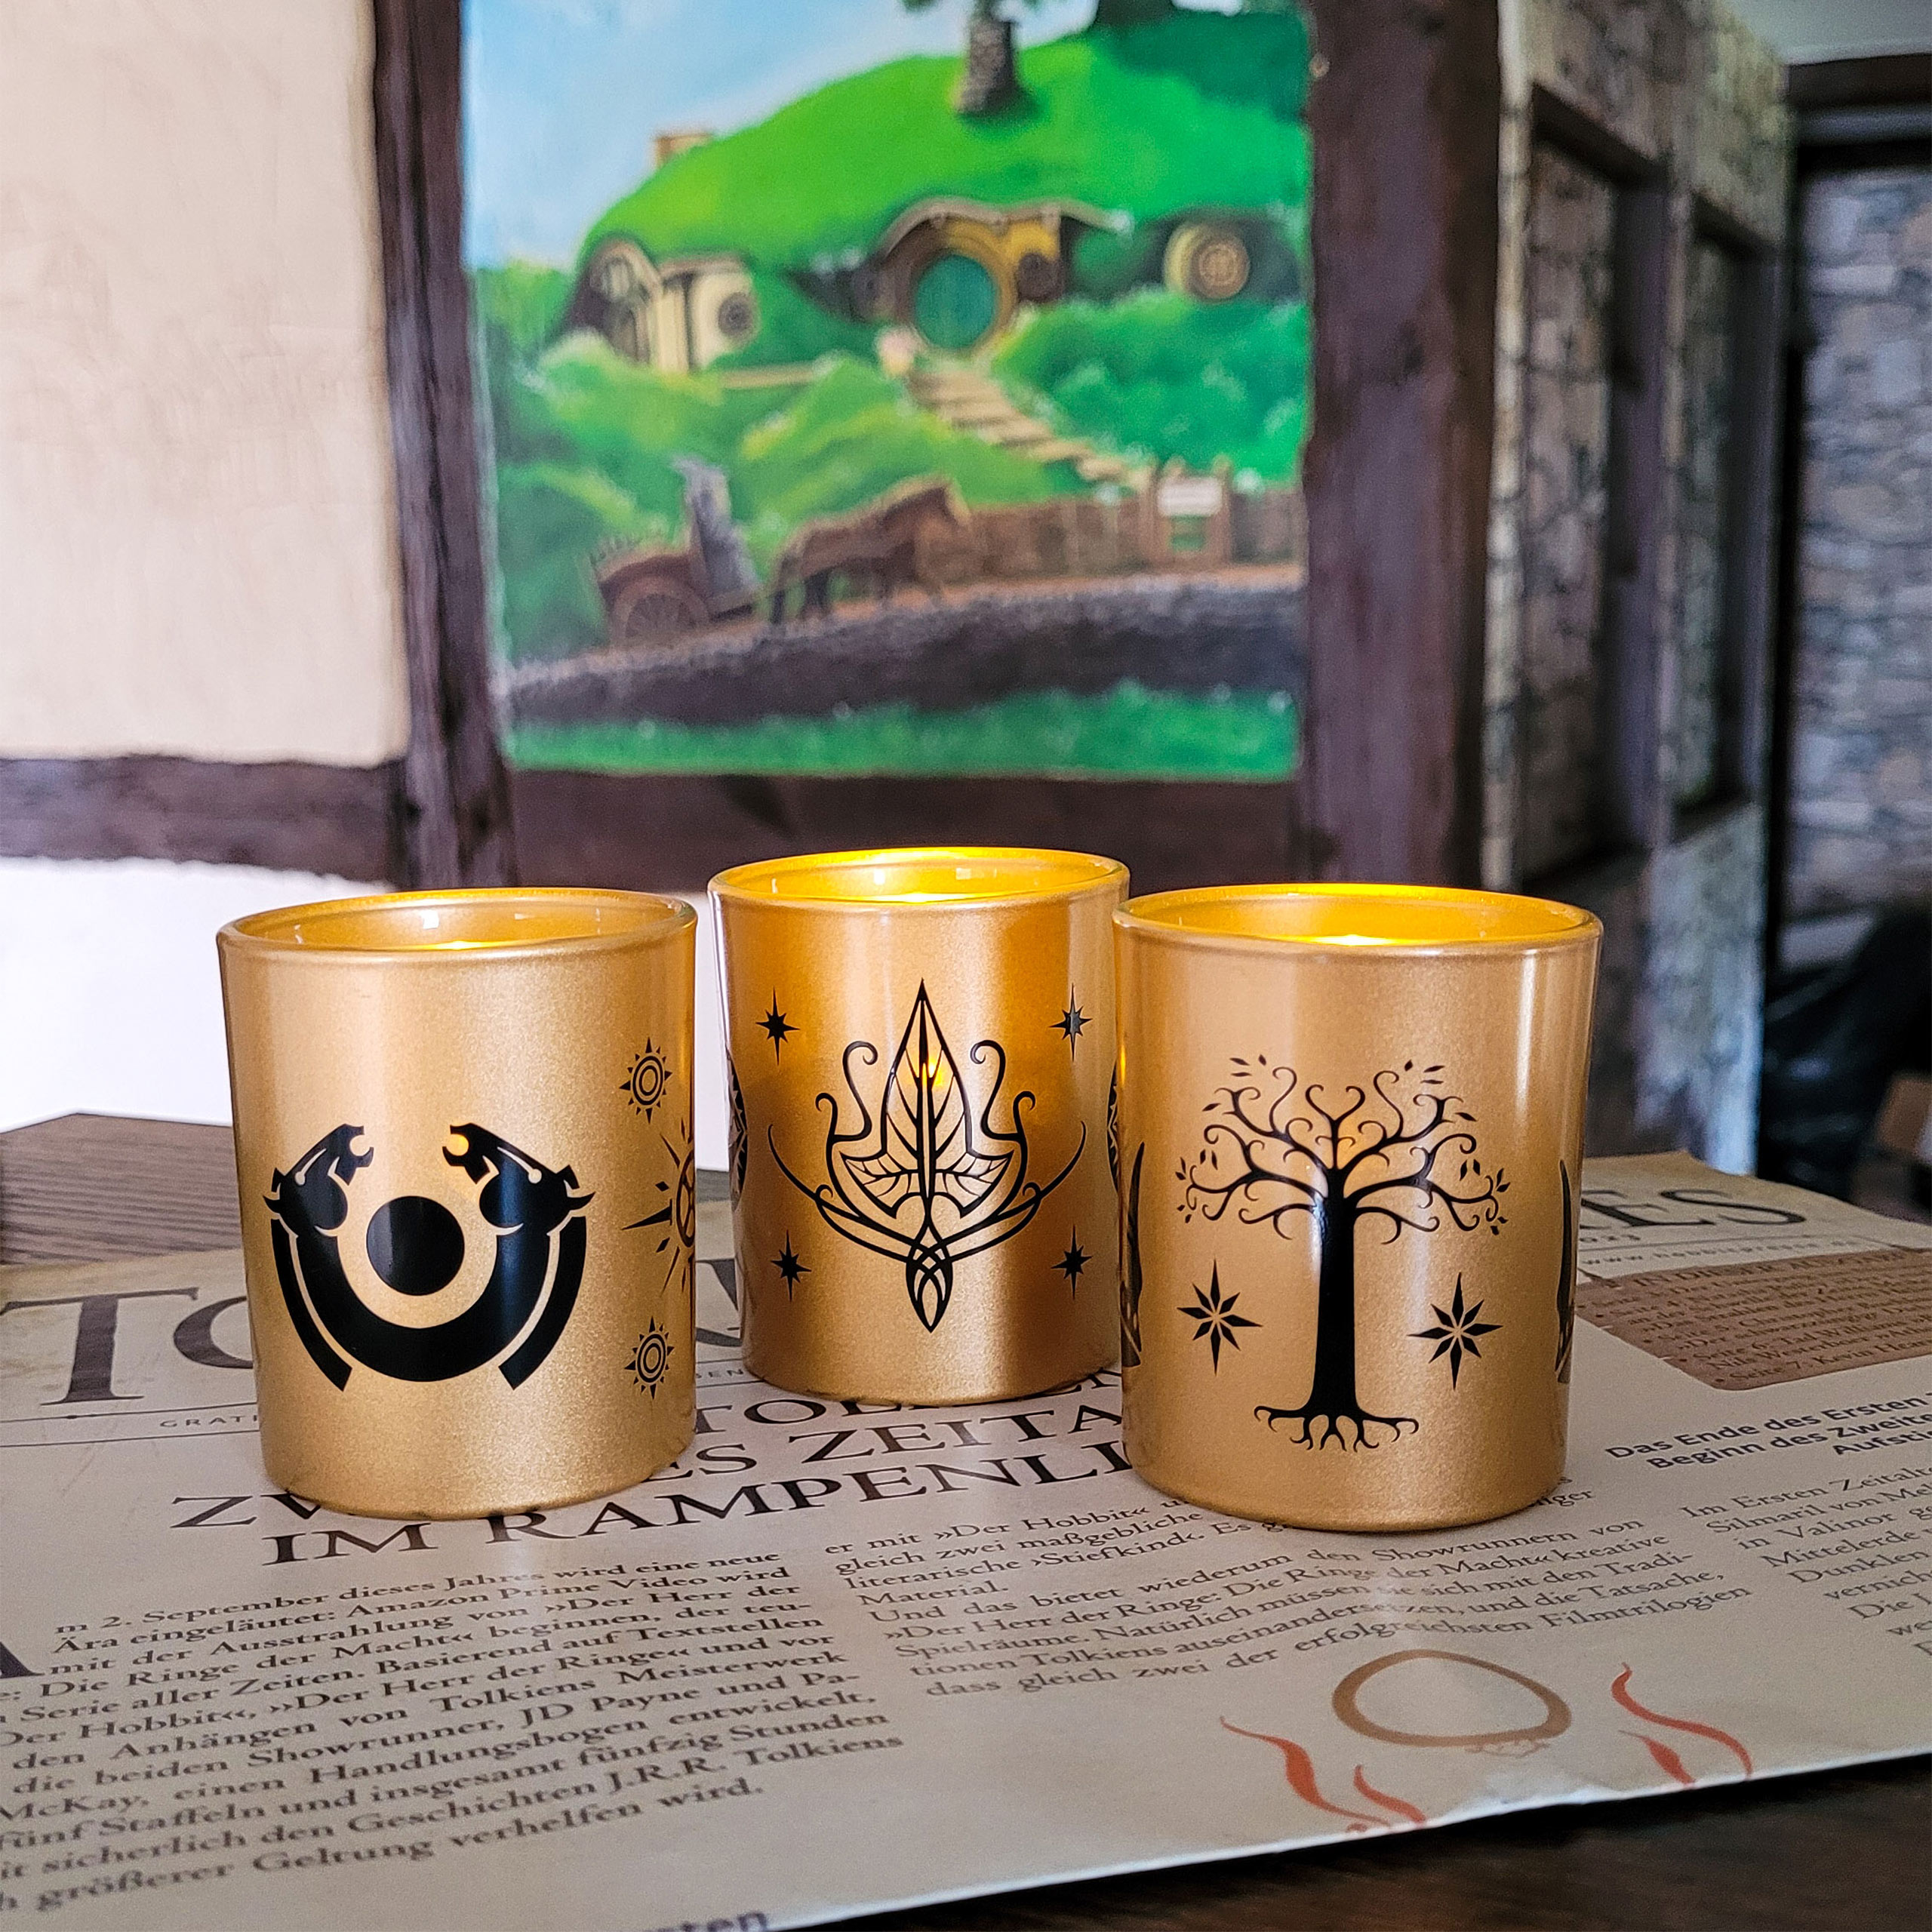 Lord of the Rings - Middle Earth Tealight Holder Set of 3